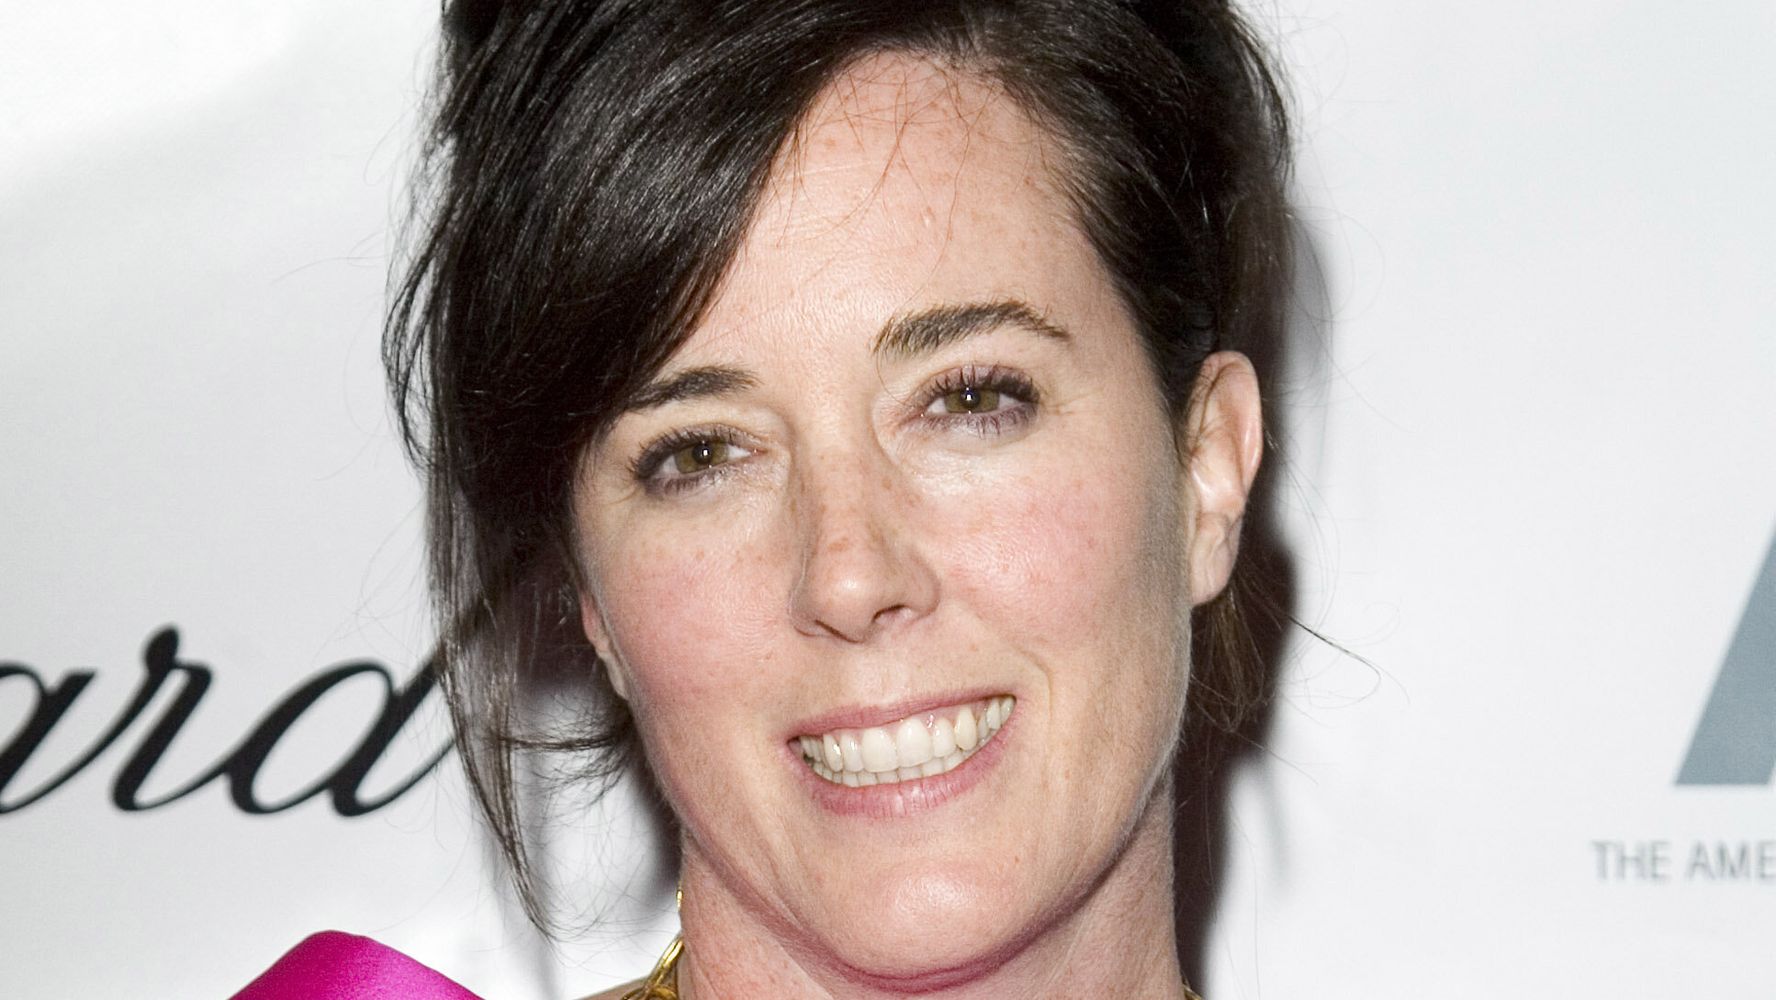 Ulta Apologizes After 'Very Insensitive' Kate Spade Email: 'Truly An Error'  | HuffPost Entertainment